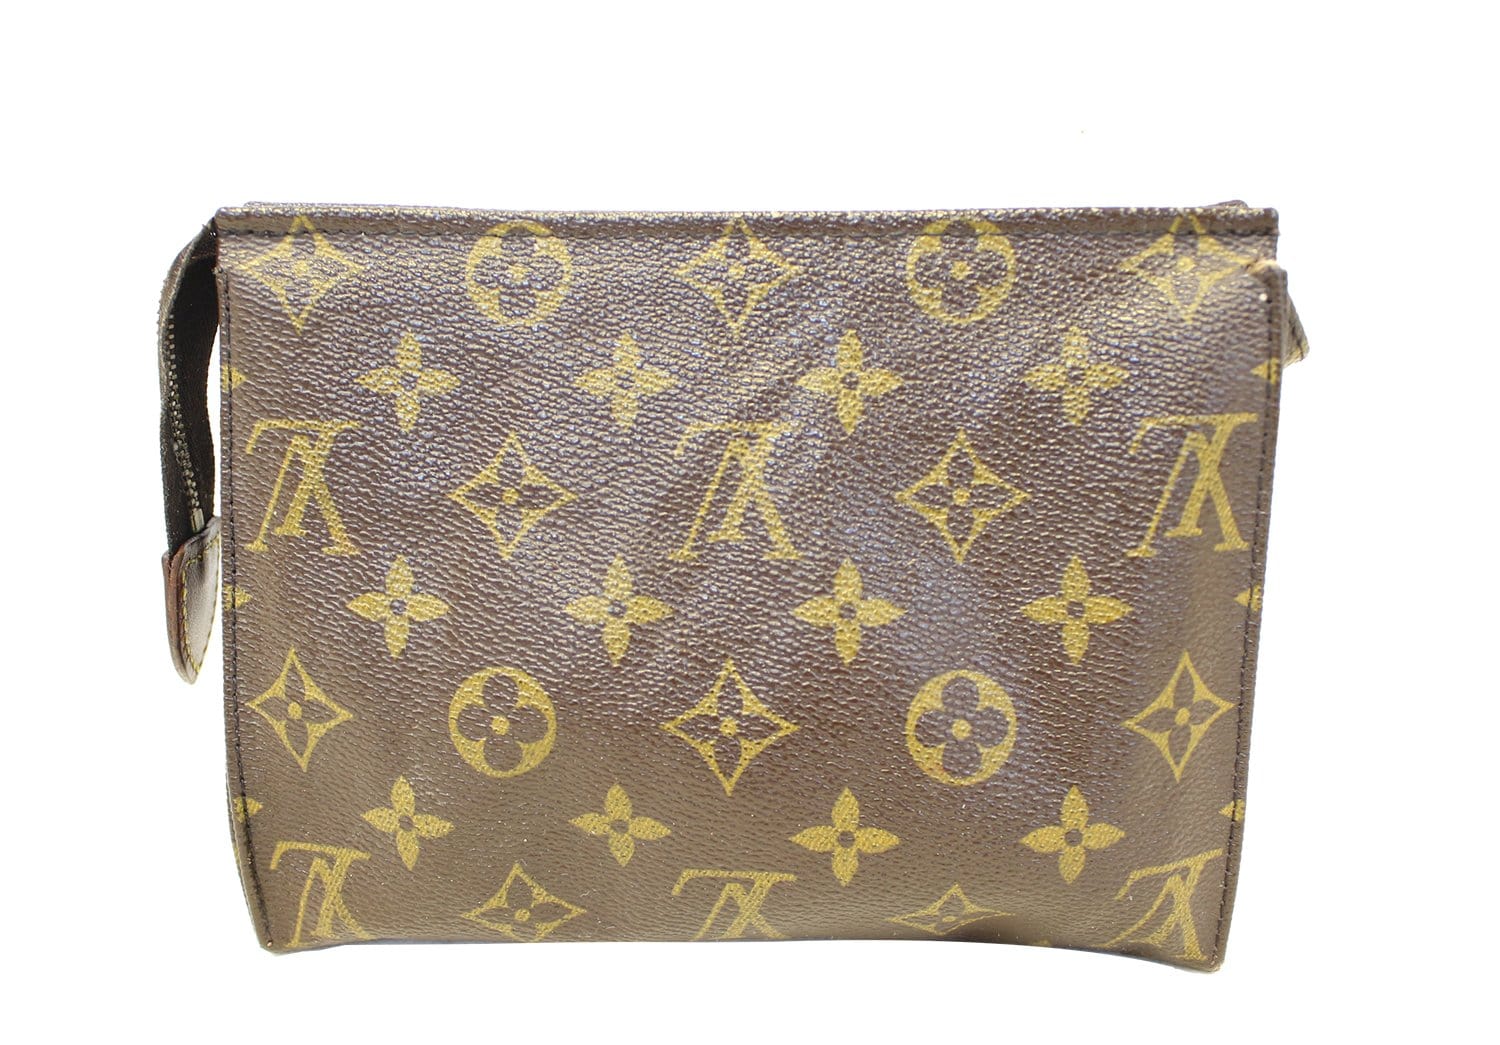 LOUIS VUITTON Authentic Toiletry 19 Clutch Purse Bag LV Pouch Monogram  Canvas Brown Vintage Collectible lv NO0948 Made in France in 1998